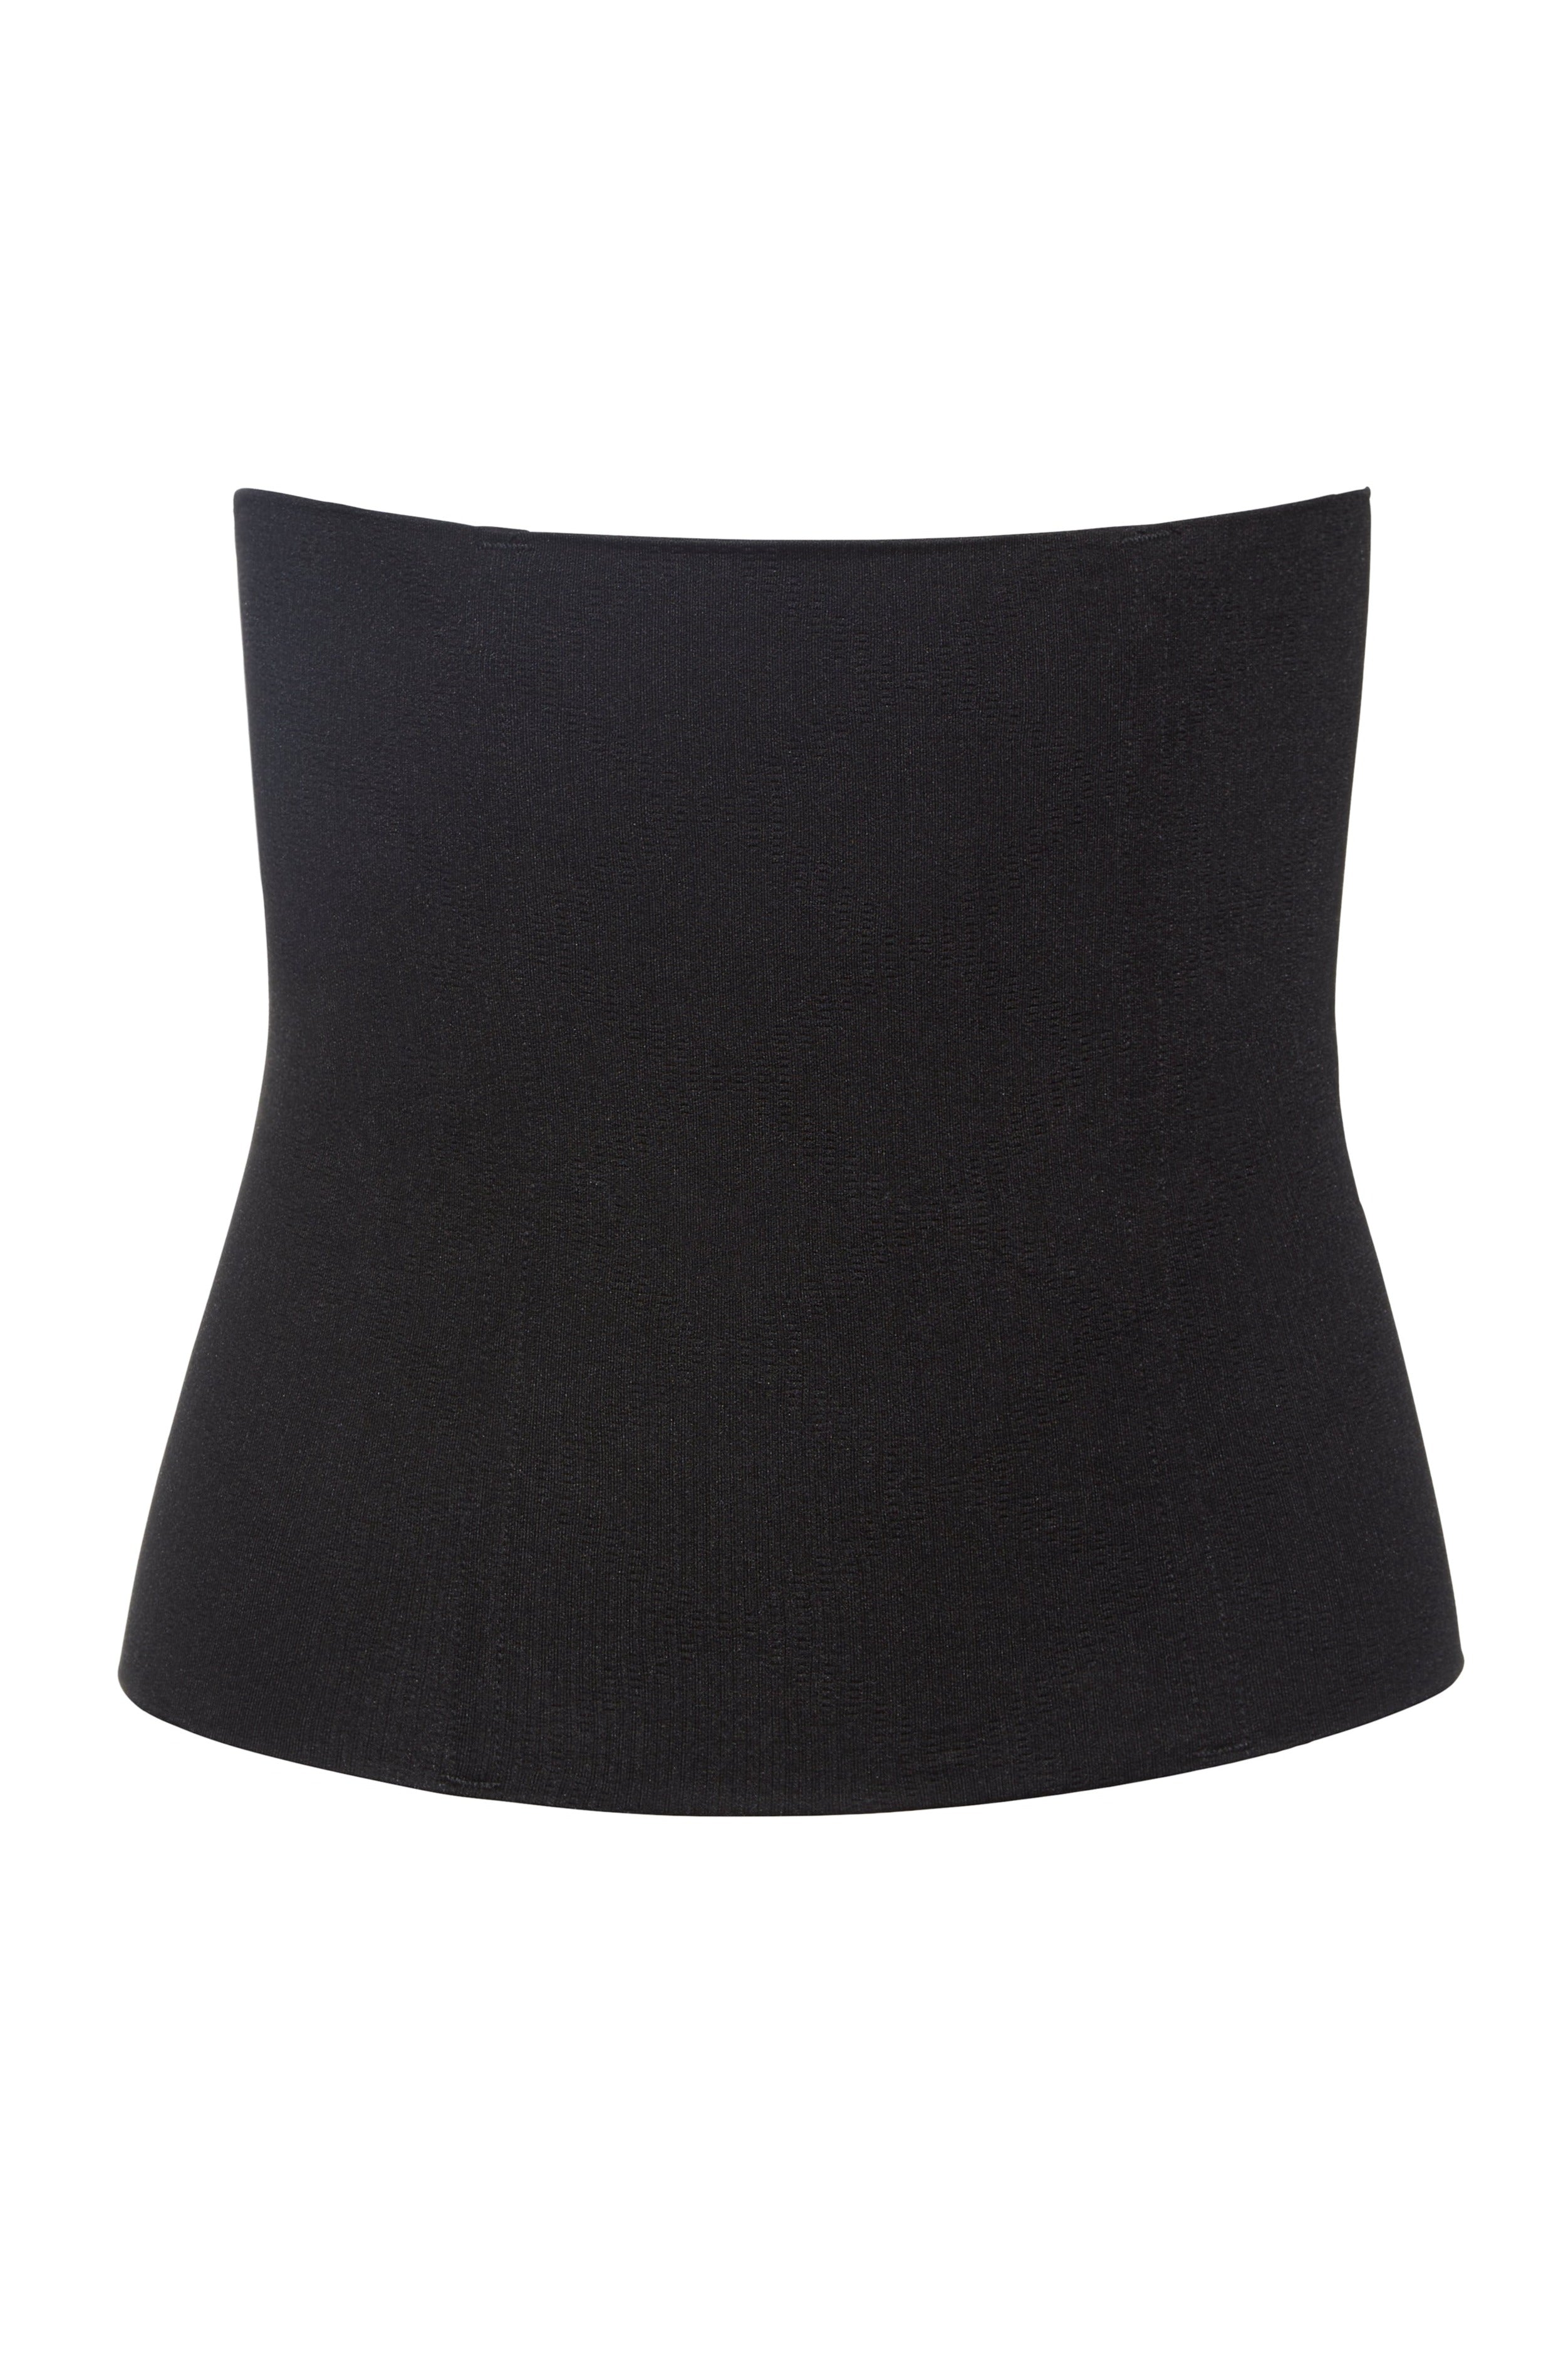 Shop The Support Compression Waist Trainer